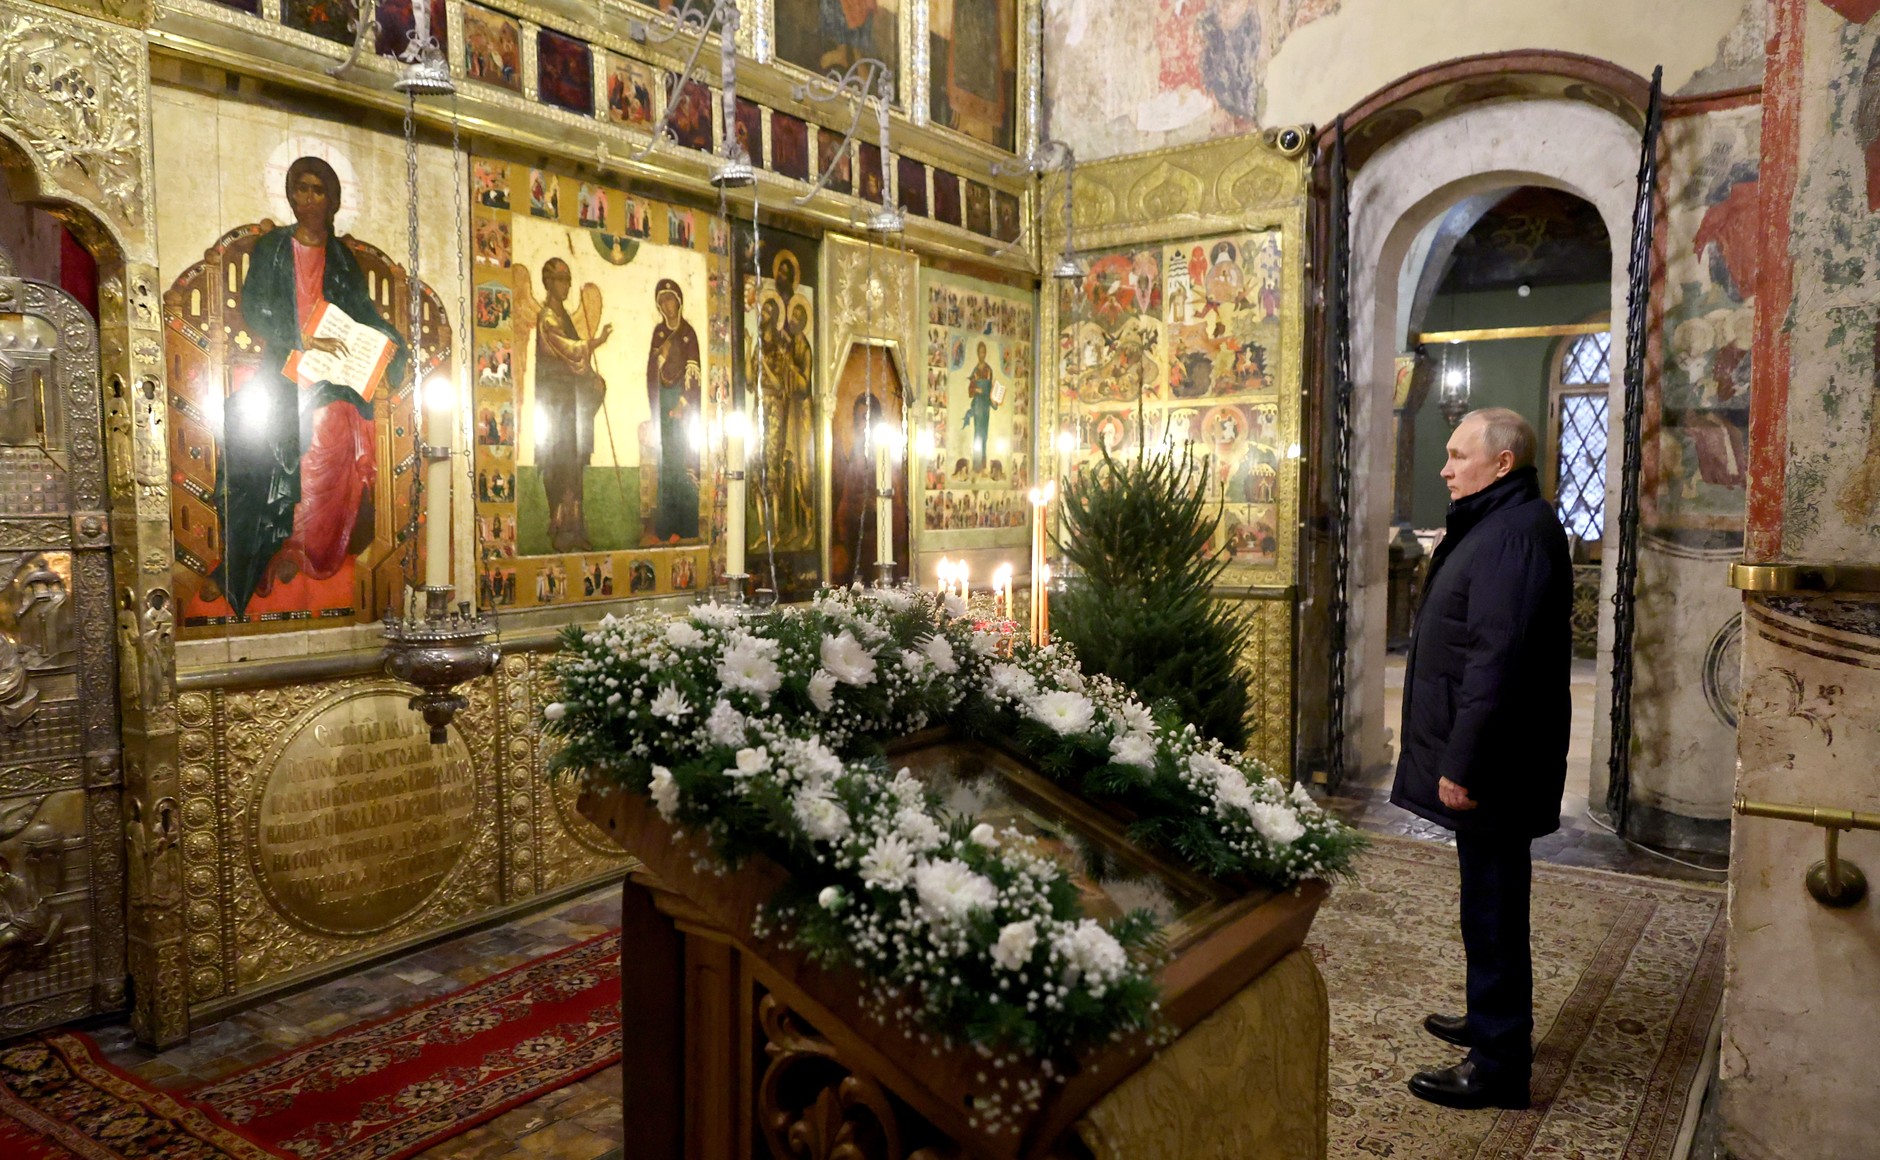 Christmas in Russia attended by PResident Putin